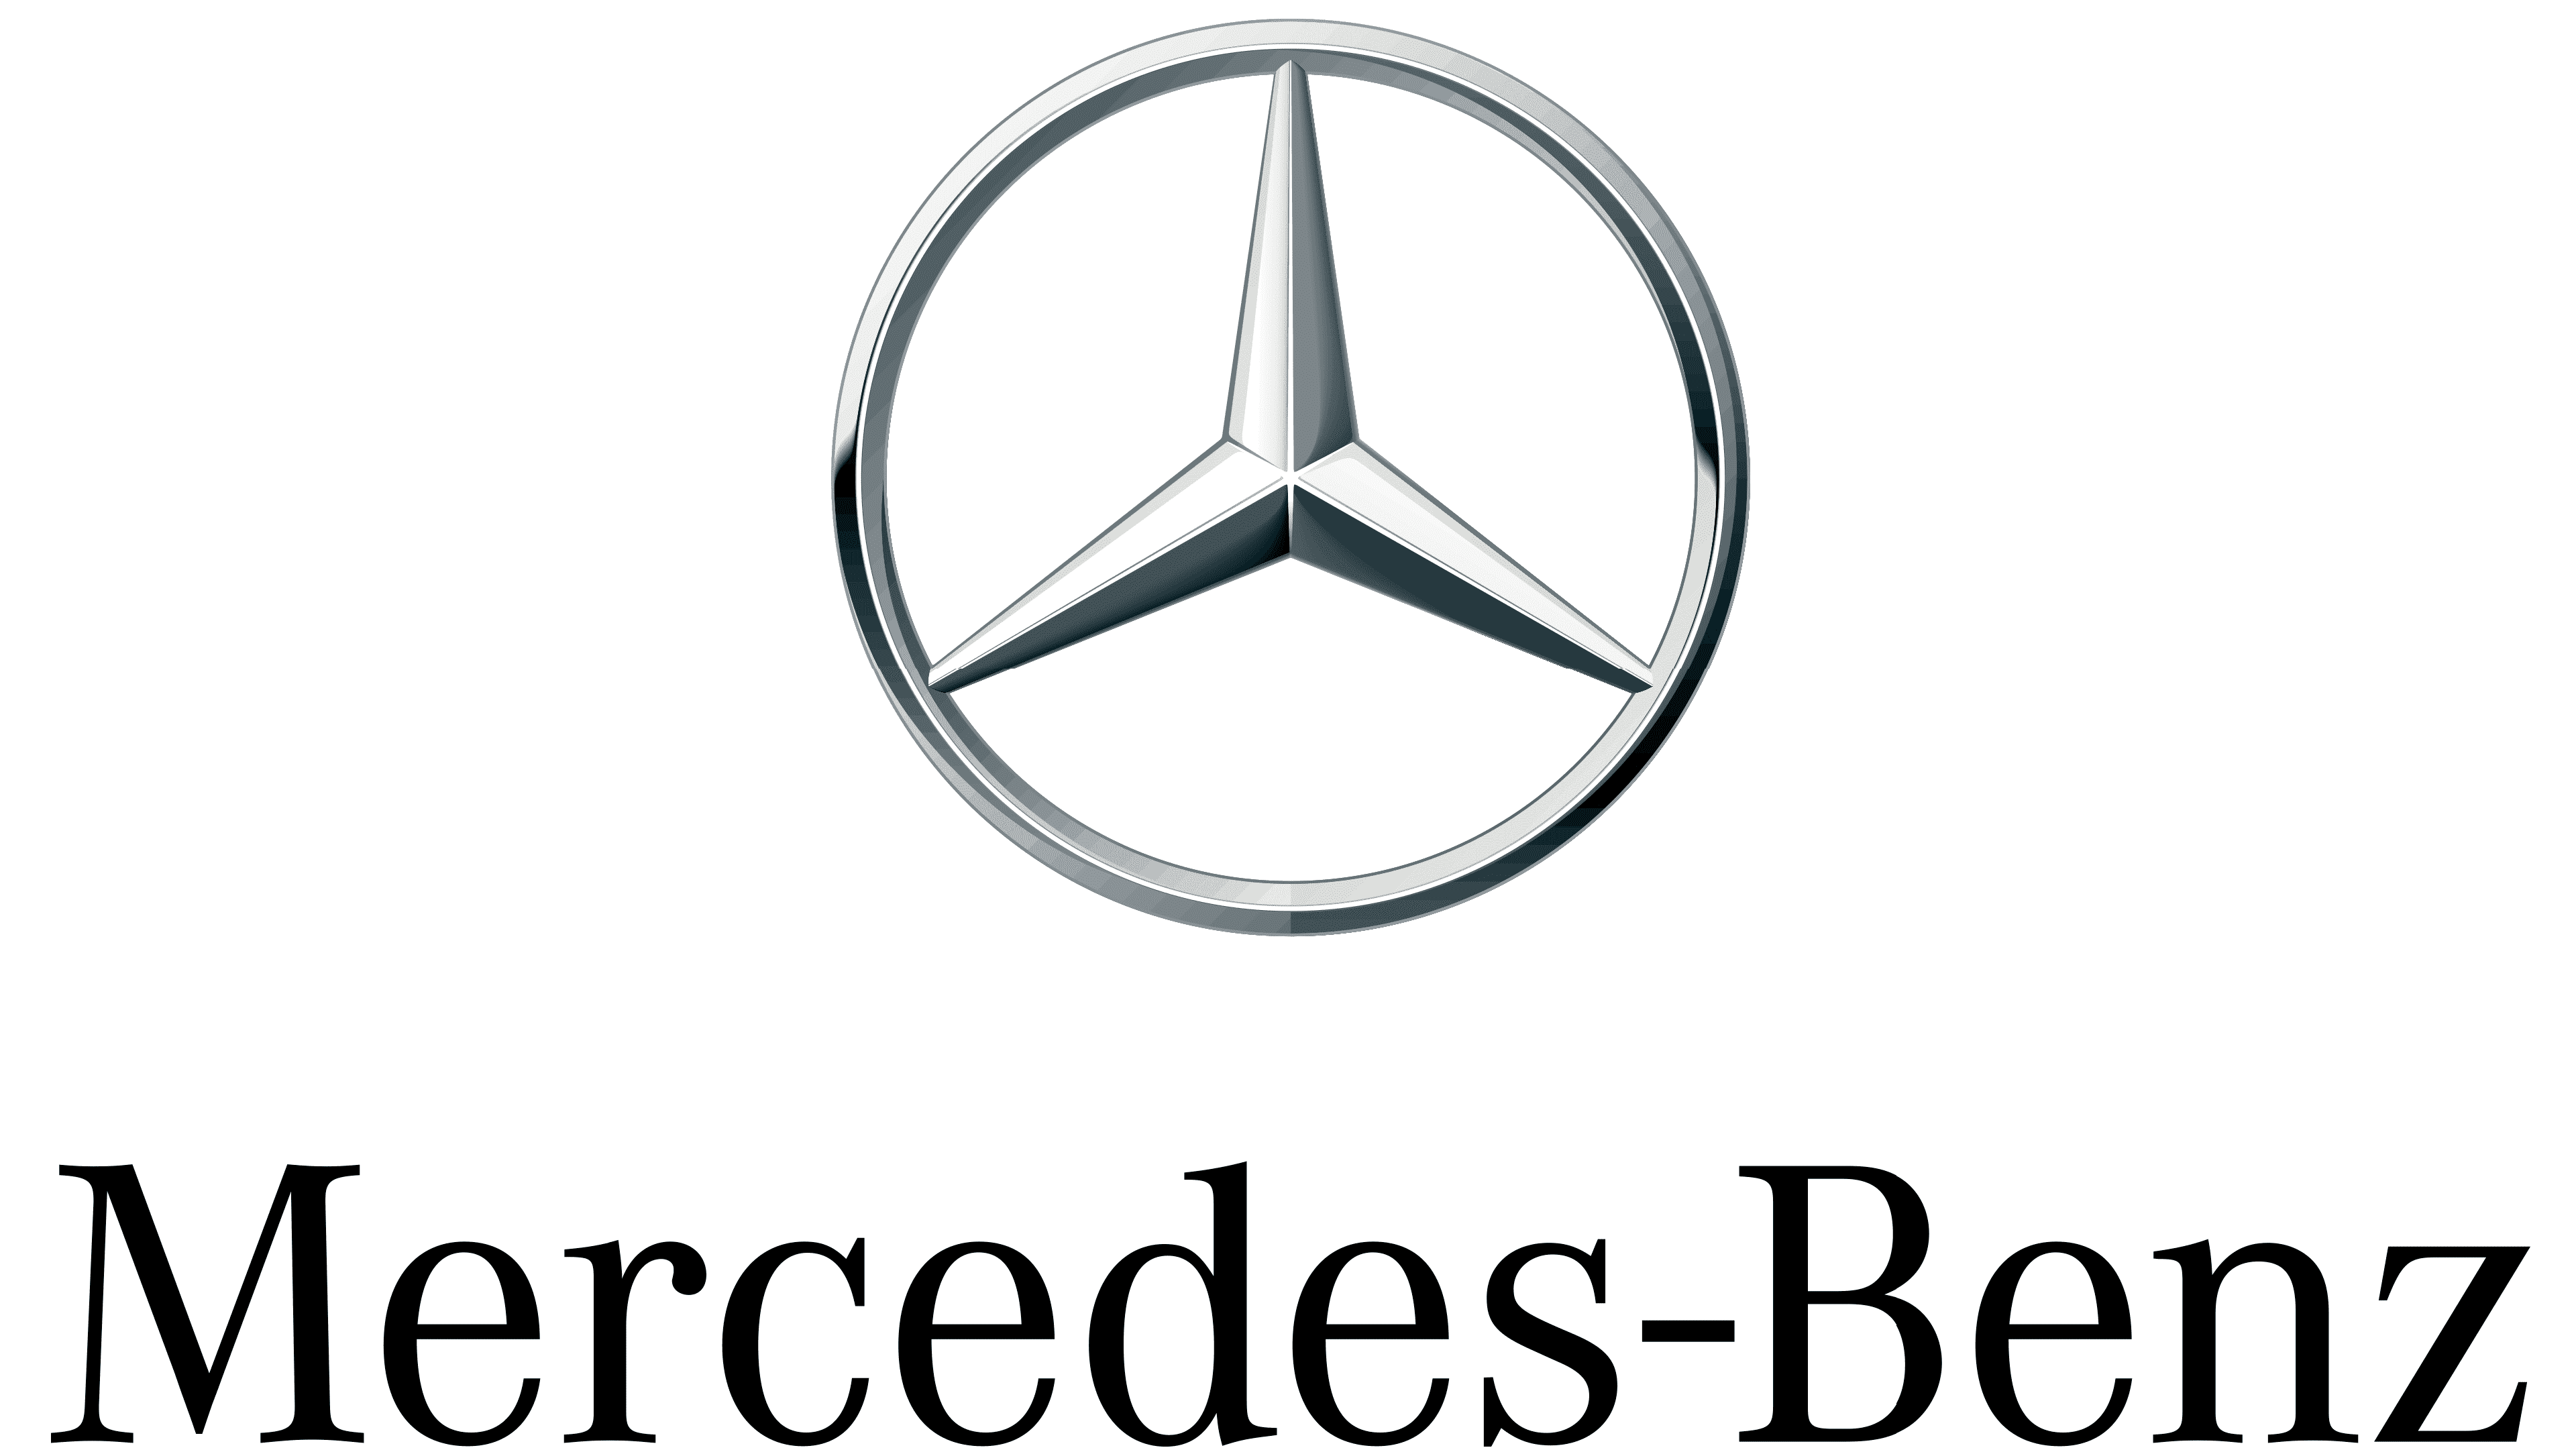 Mercedes share dividend and yield